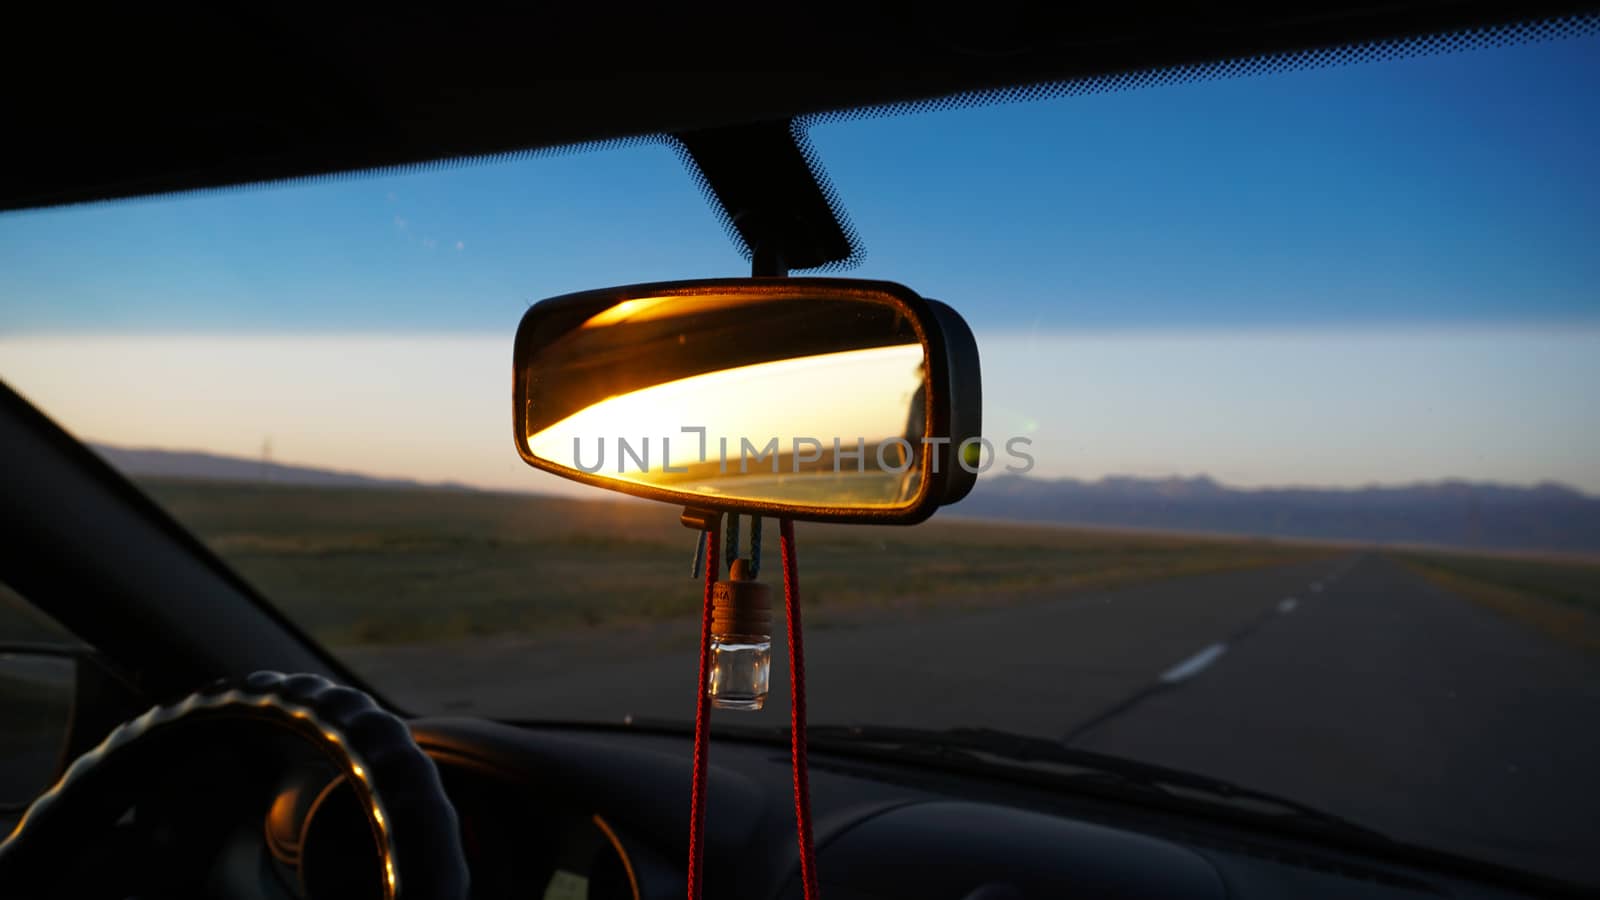 The rear view mirror of the car and dawn. by Passcal